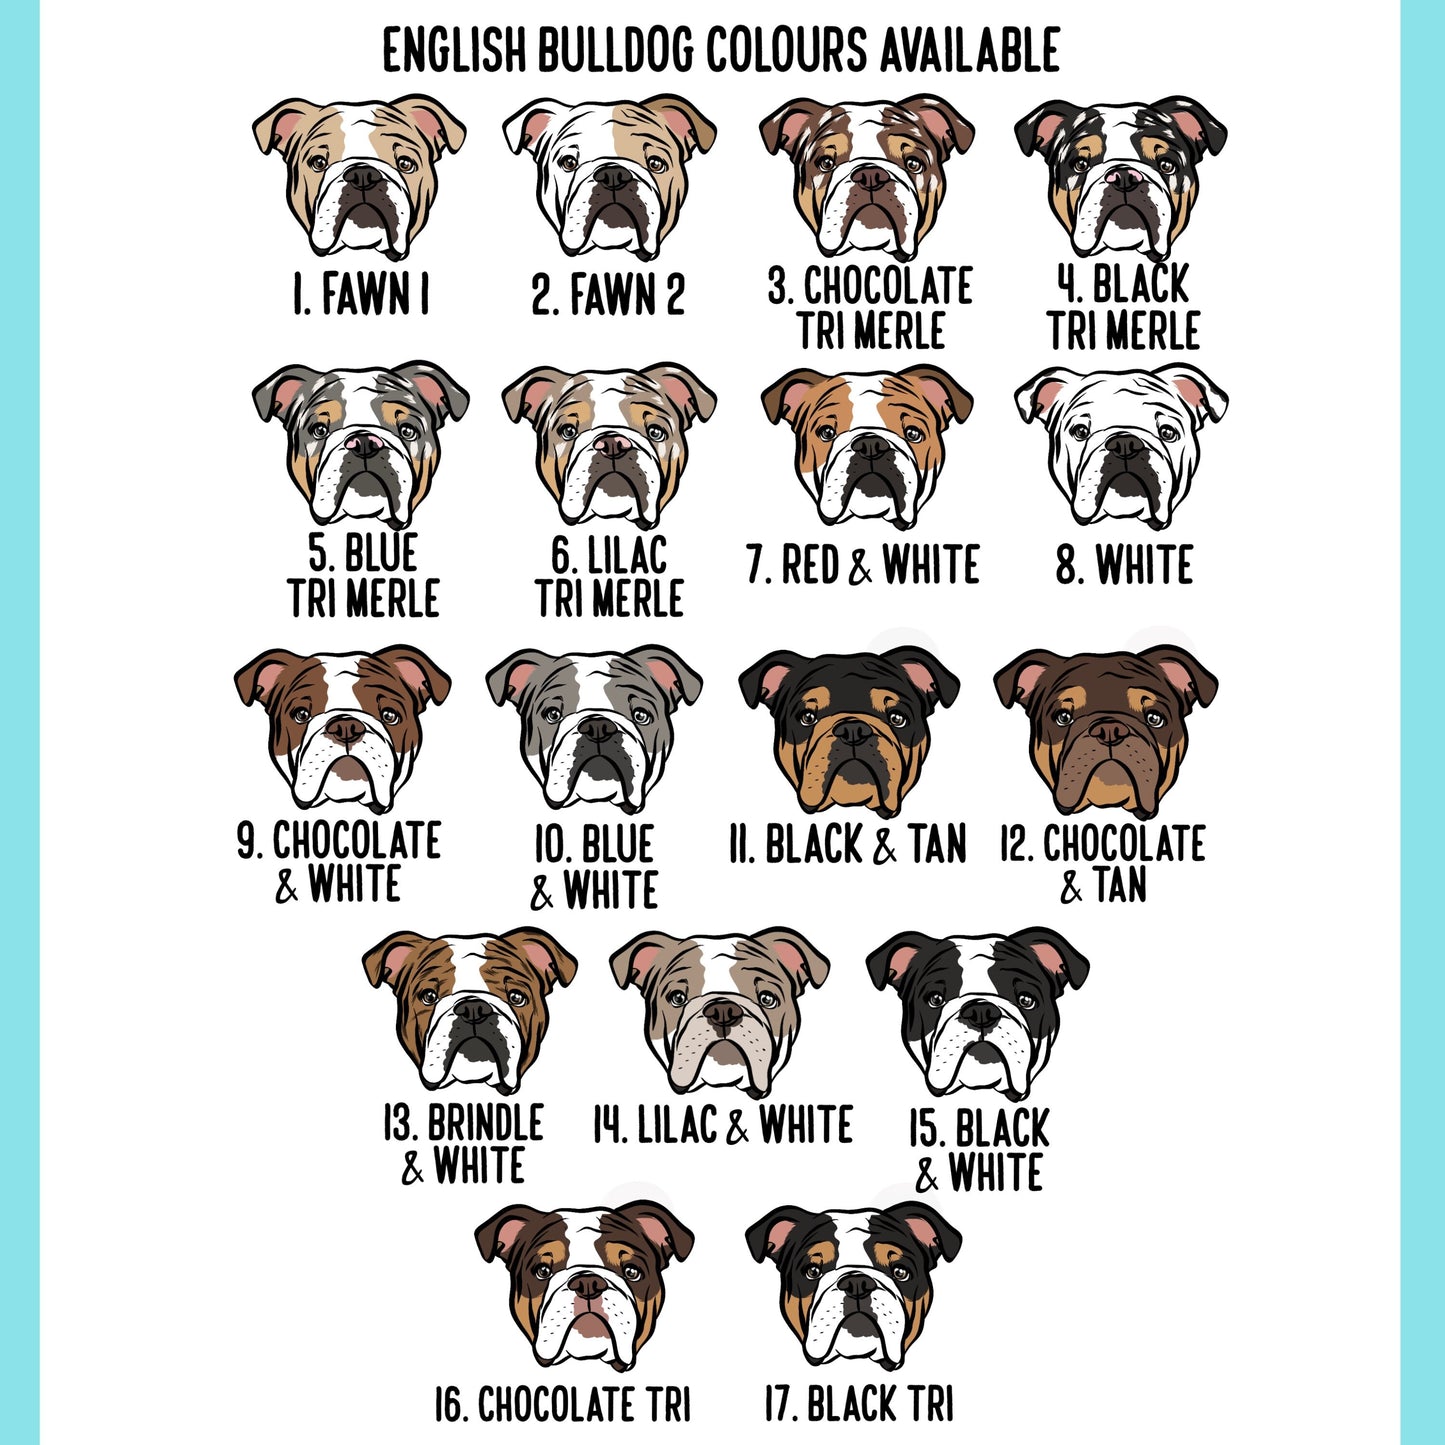 English Bulldog Collar/ Customisable Dog Print Collar/ Personalised Pet Patterned Collar/ Dog Collar With Name/ Bully Breed Owner Gifts